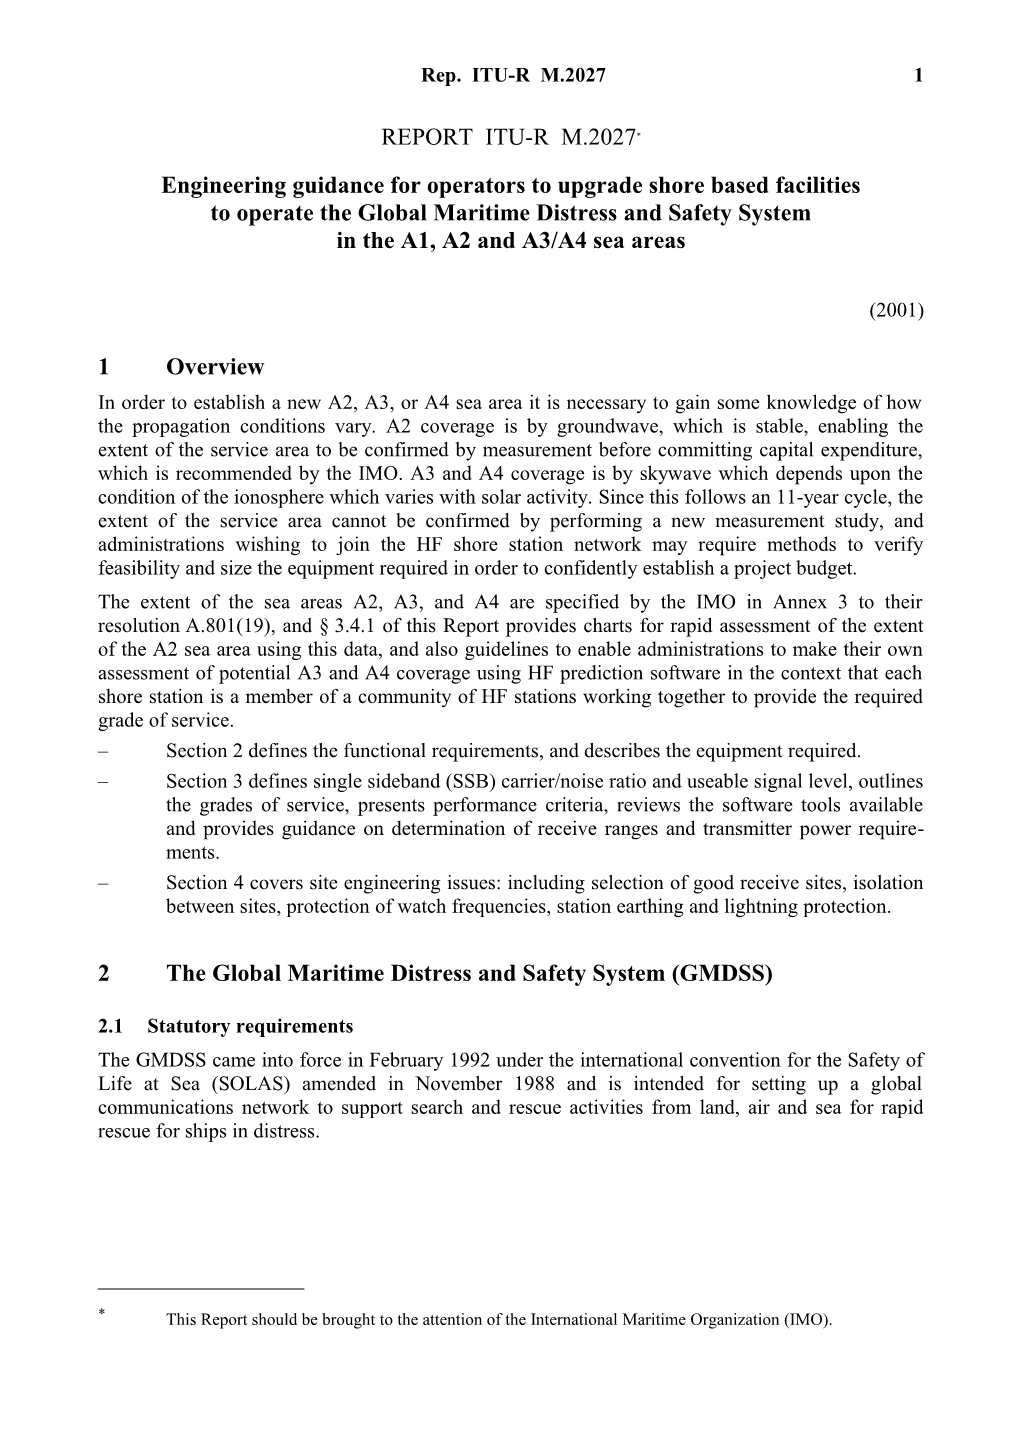 REPORT ITU-R M.2027 - Engineering Guidance for Operators to Upgrade Shore Based Facilities